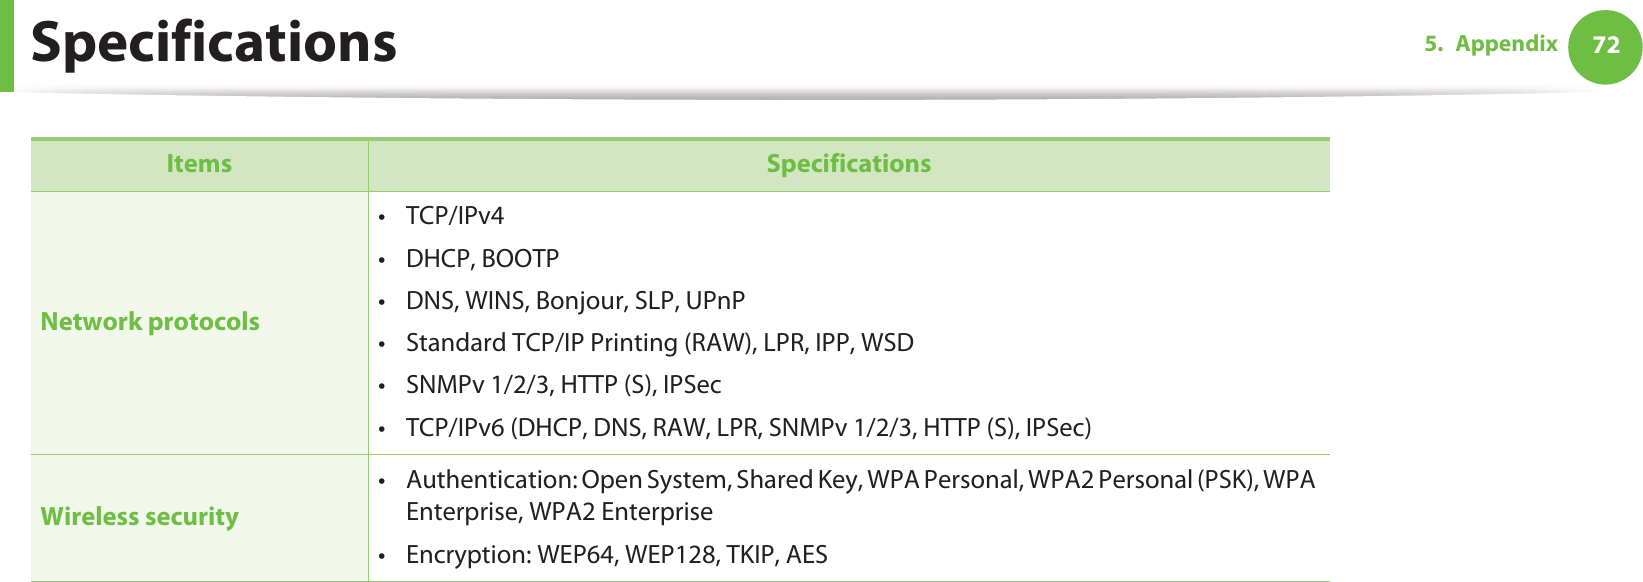 Specifications 725. Appendix Network protocols•TCP/IPv4• DHCP, BOOTP• DNS, WINS, Bonjour, SLP, UPnP• Standard TCP/IP Printing (RAW), LPR, IPP, WSD• SNMPv 1/2/3, HTTP (S), IPSec• TCP/IPv6 (DHCP, DNS, RAW, LPR, SNMPv 1/2/3, HTTP (S), IPSec)Wireless security • Authentication: Open System, Shared Key, WPA Personal, WPA2 Personal (PSK), WPA Enterprise, WPA2 Enterprise• Encryption: WEP64, WEP128, TKIP, AESItems Specifications